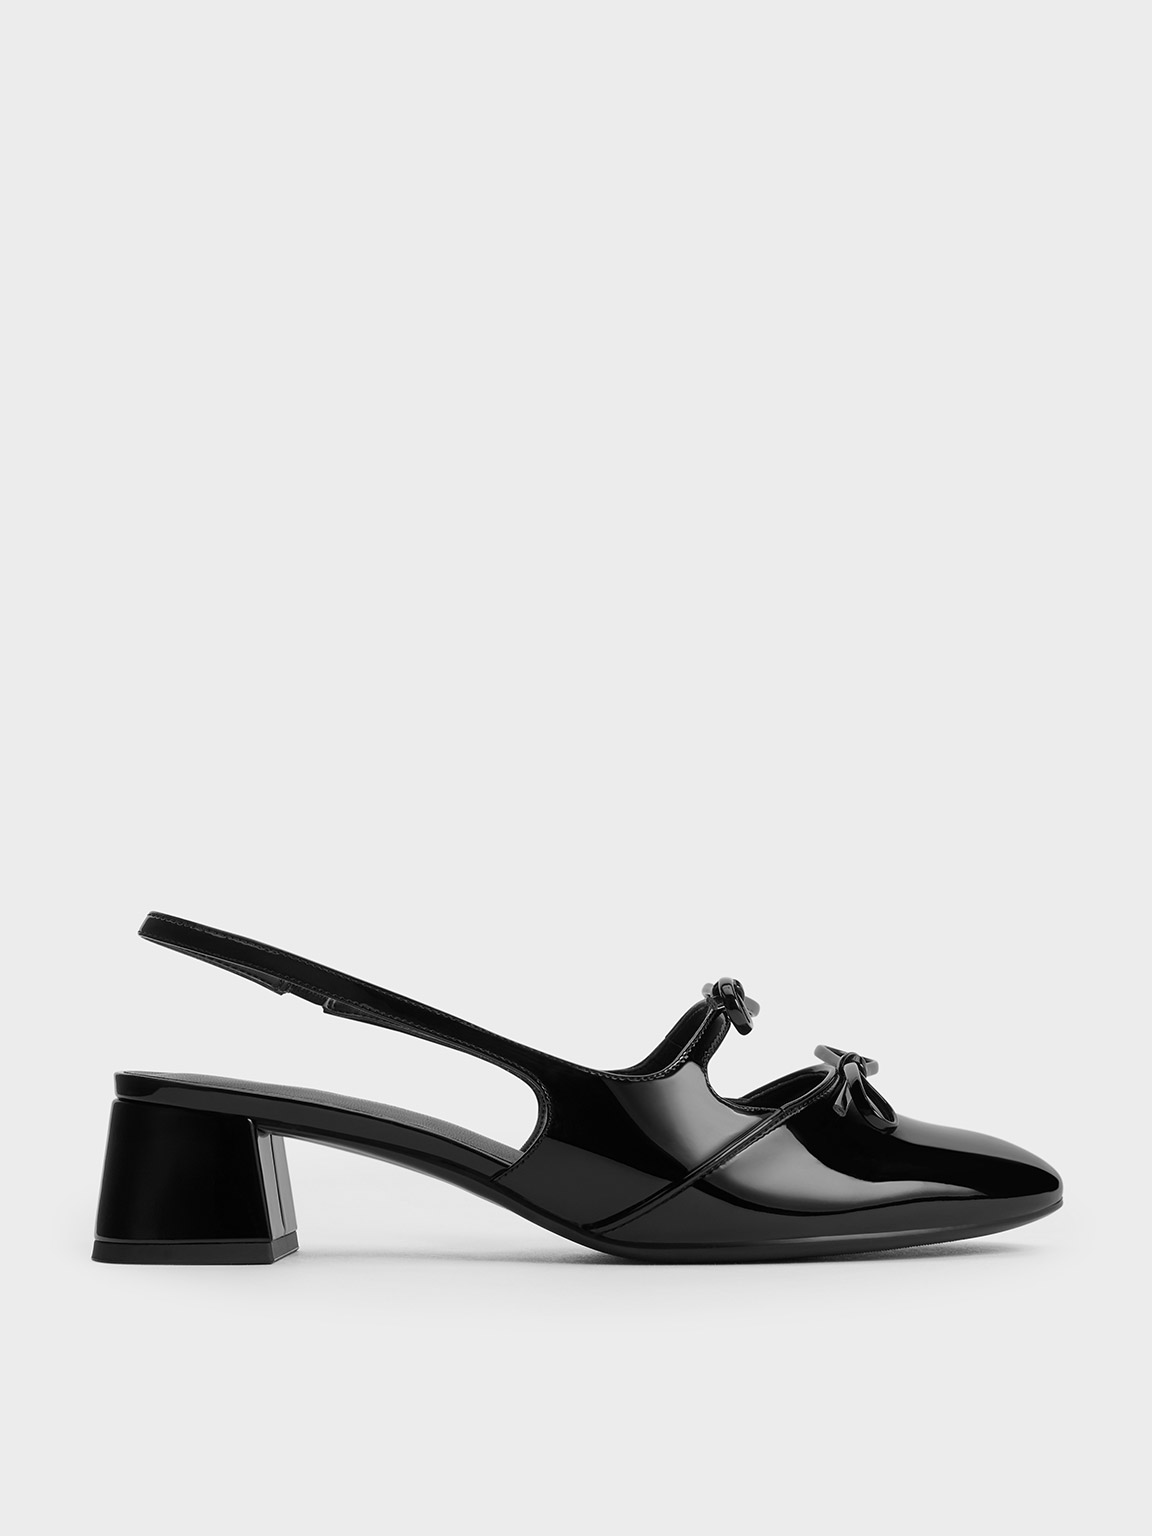 Charles & Keith Dorri Double-bow Slingback Pumps In Black Patent